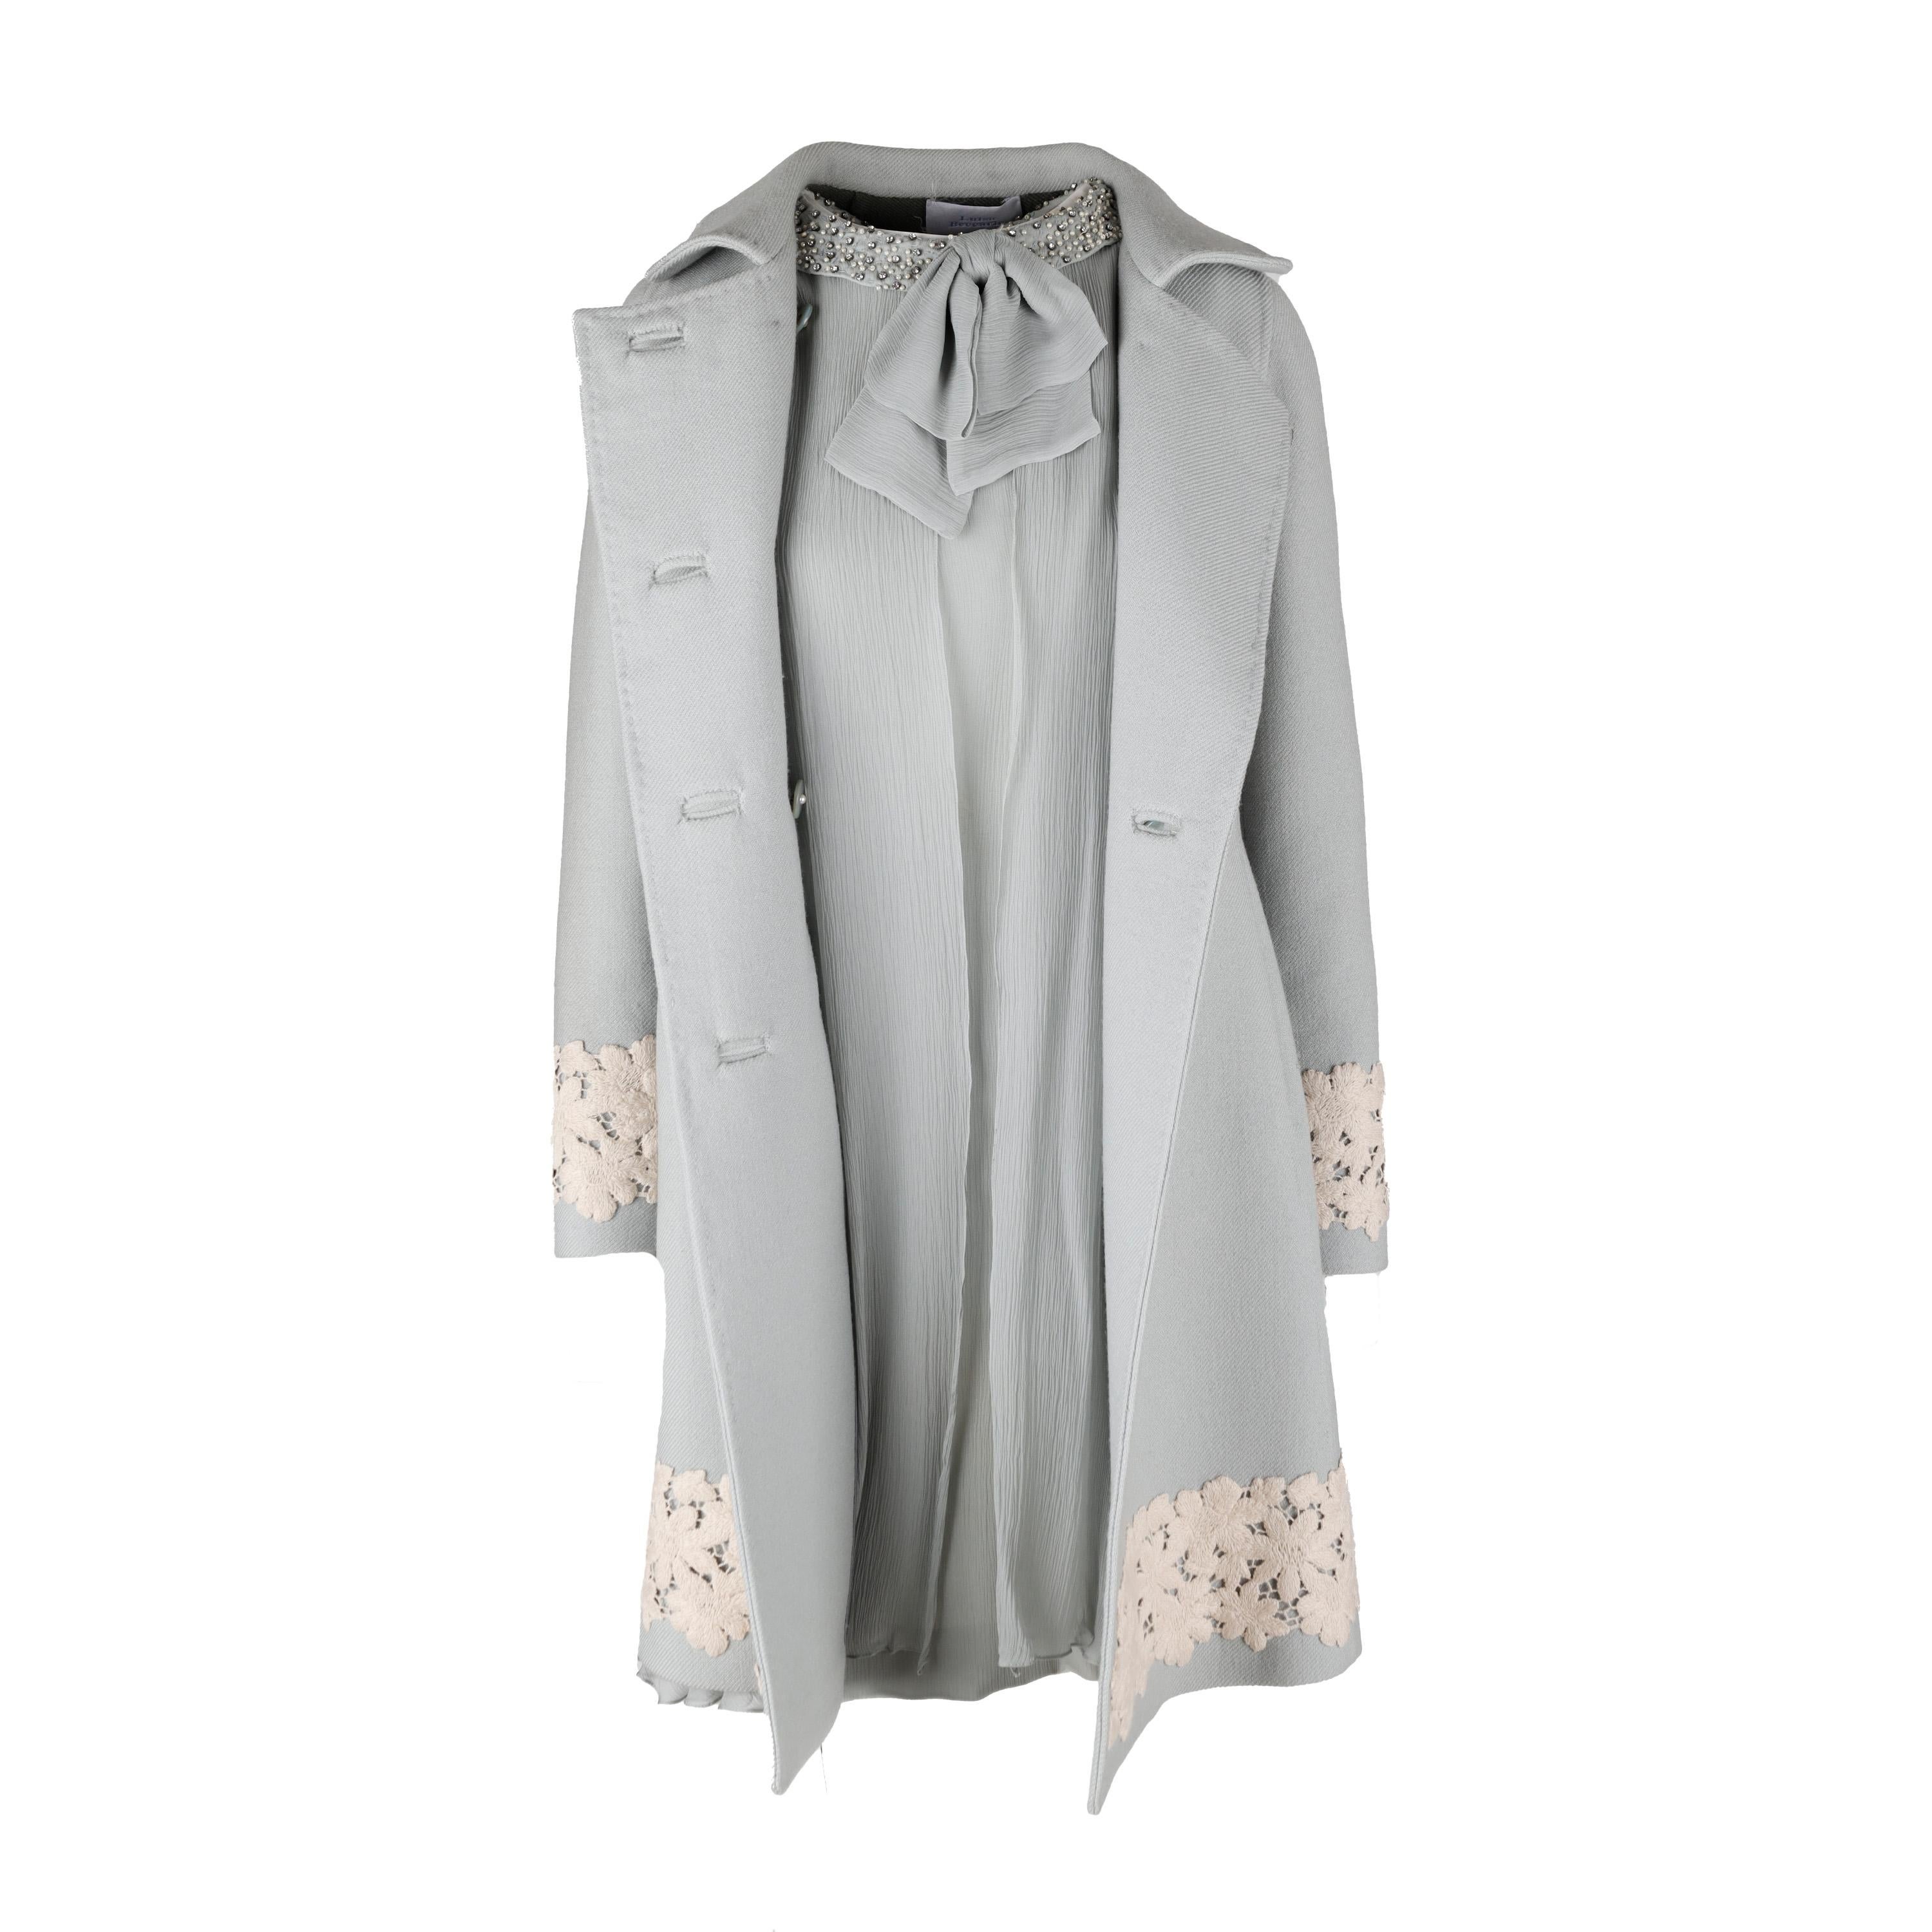 This Luisa Beccaria dress and coat set is crafted with quality in mind. In a soft powder blue, the fitted wool coat features a double-breasted silhouette with buttons in the front and white embroideries at the hem as a luxe detail. The sleeveless